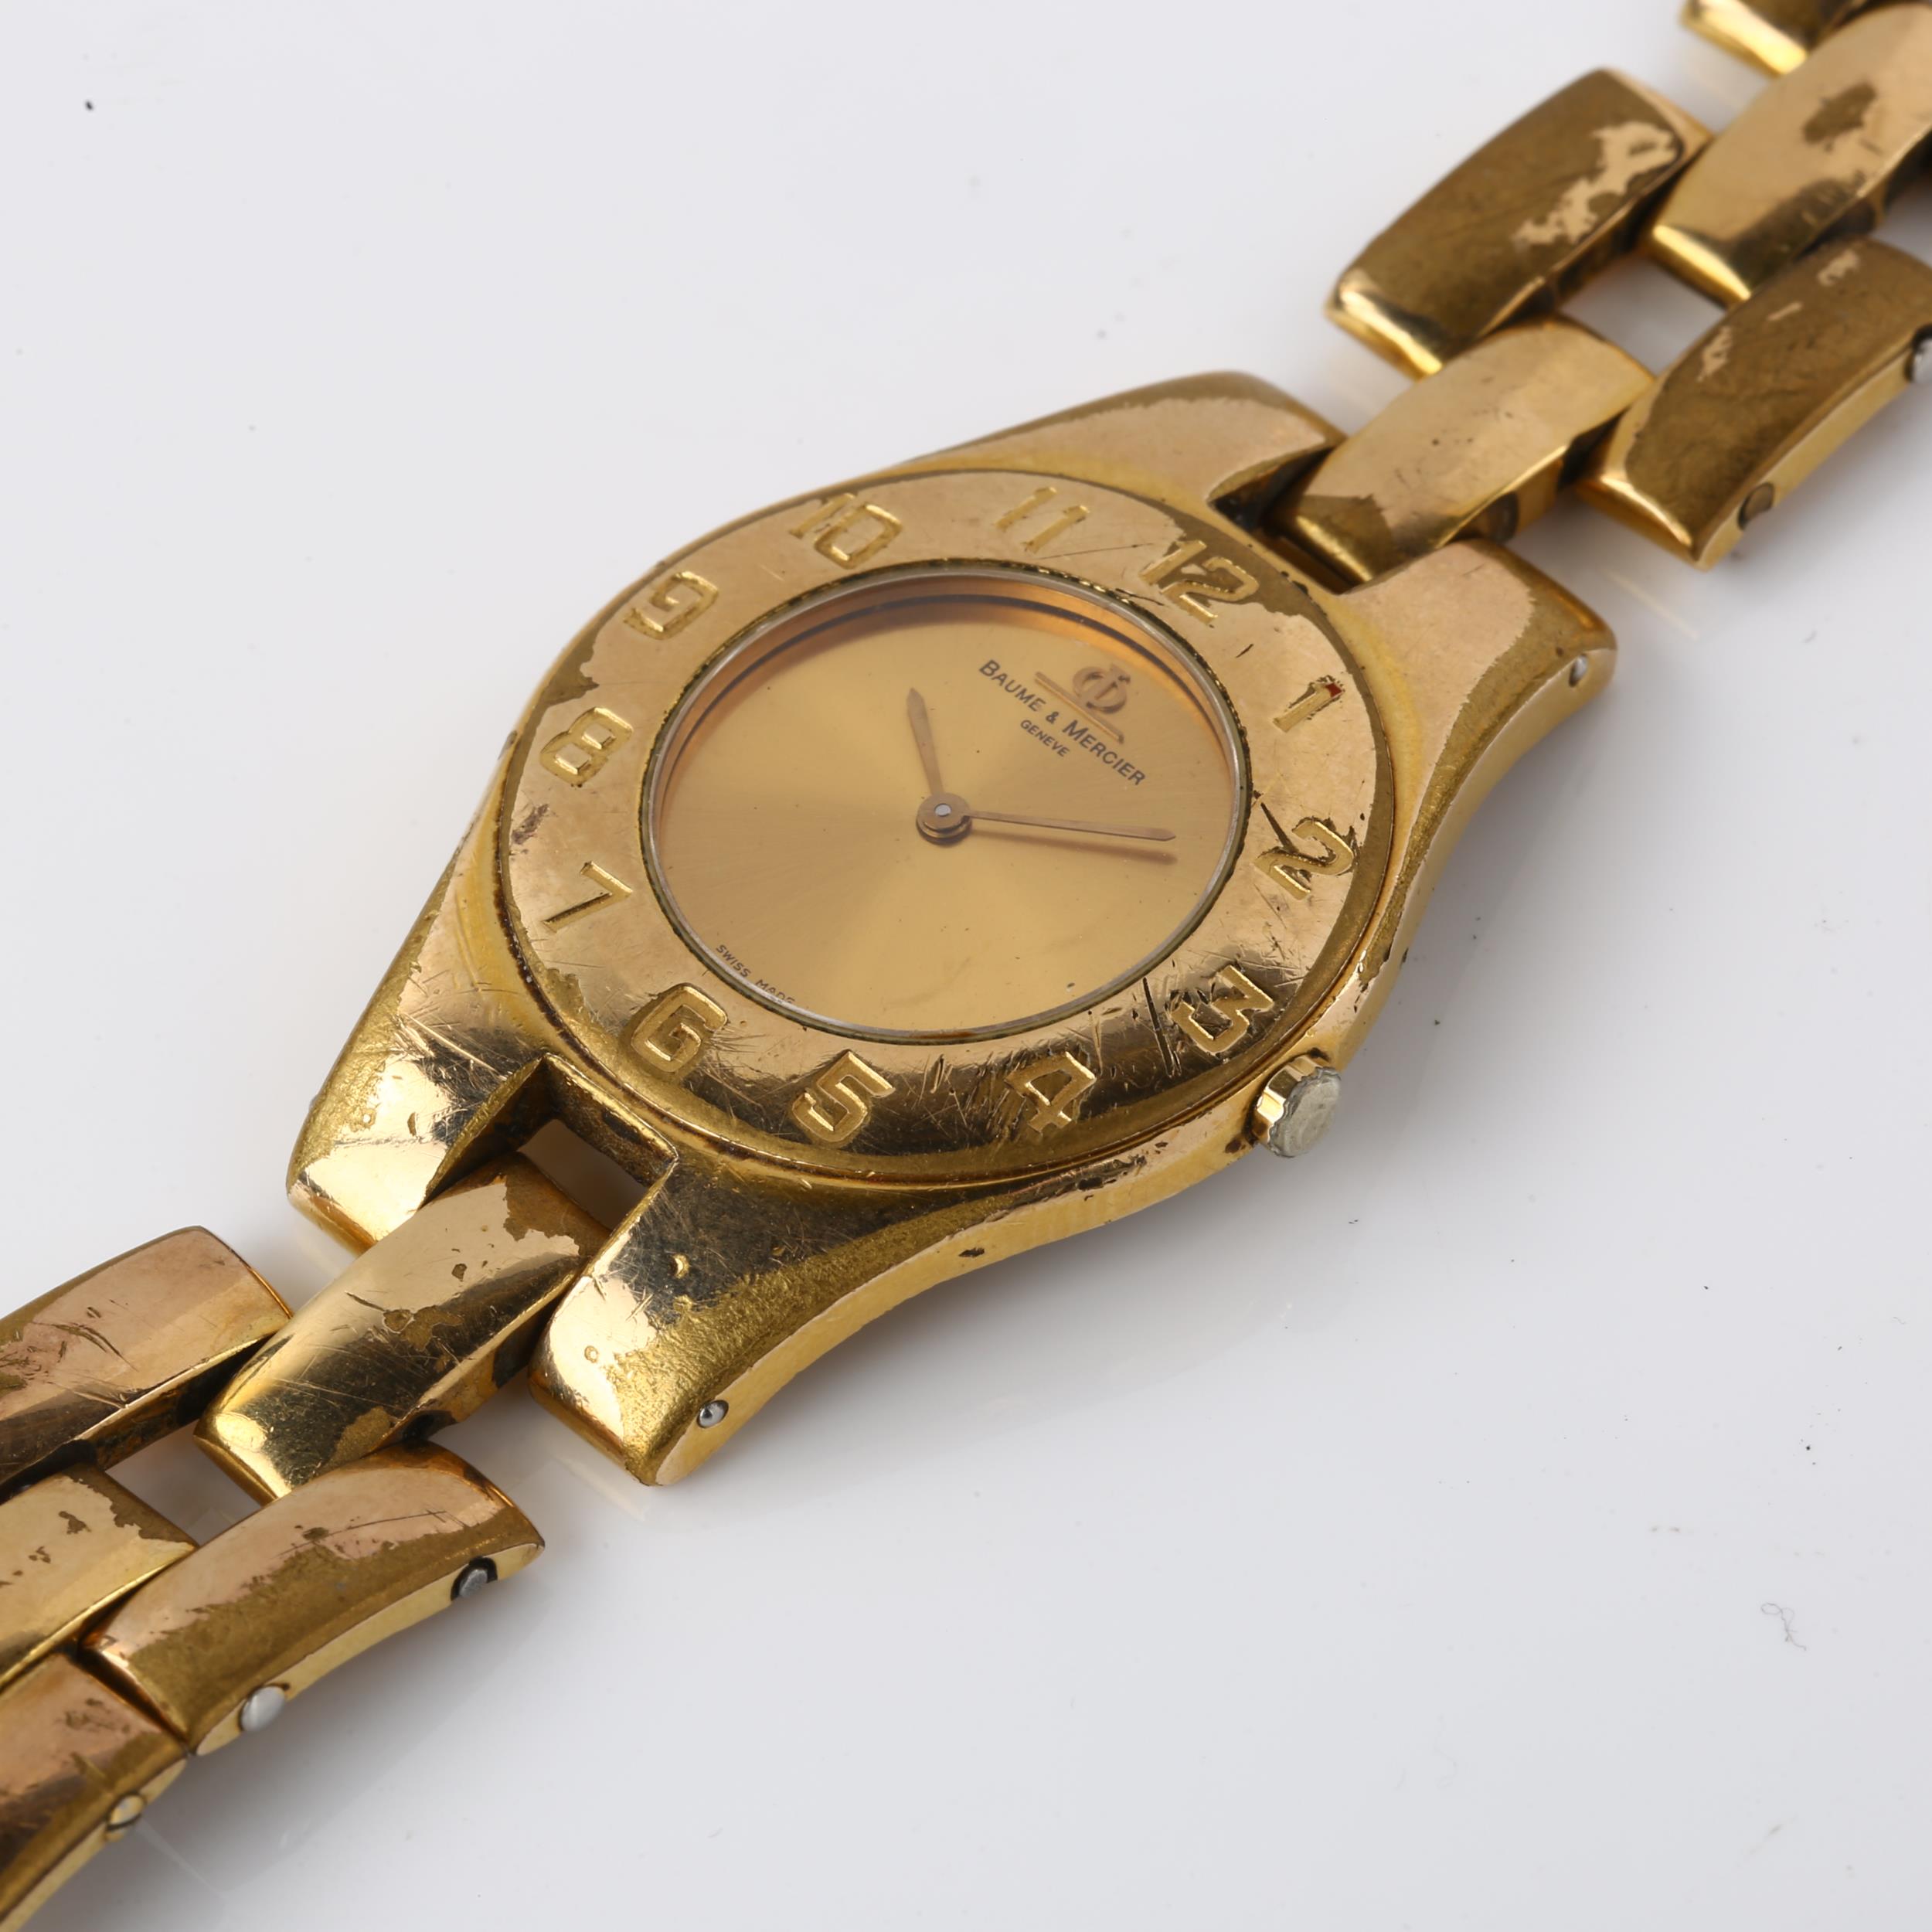 BAUME & MERCIER - a mid-size gold plated stainless steel quartz bracelet watch, champagne dial - Image 3 of 4